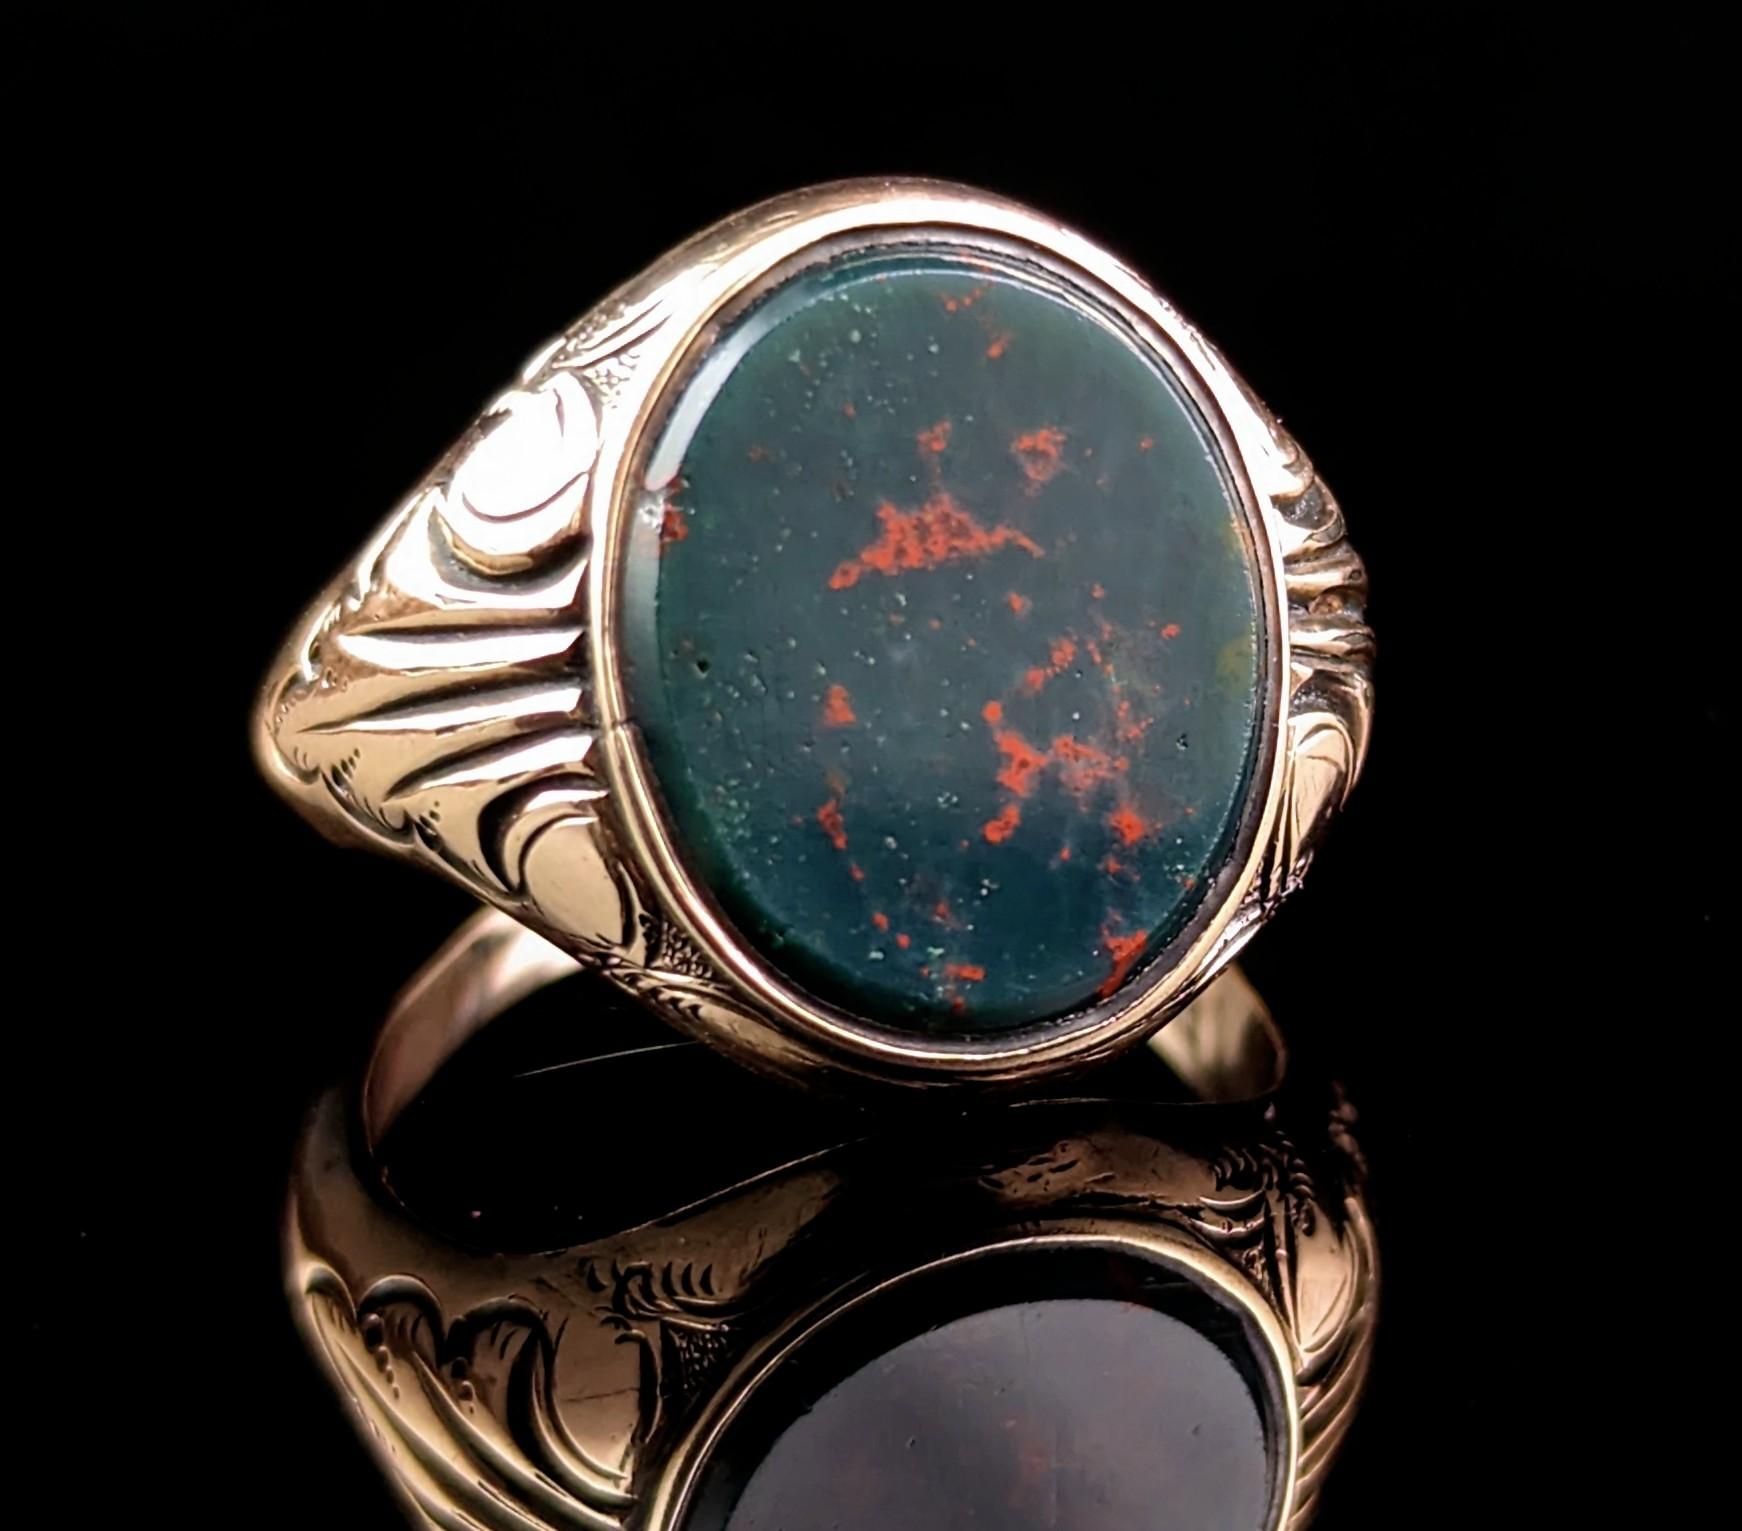 This handsome antique, Edwardian era
9ct gold and Bloodstone signet ring has everything you could wish for in a signet ring!

It is a stylish and bold ring, perfect as a pinky ring, it has an oval face set with a rich dark green Bloodstone, this has